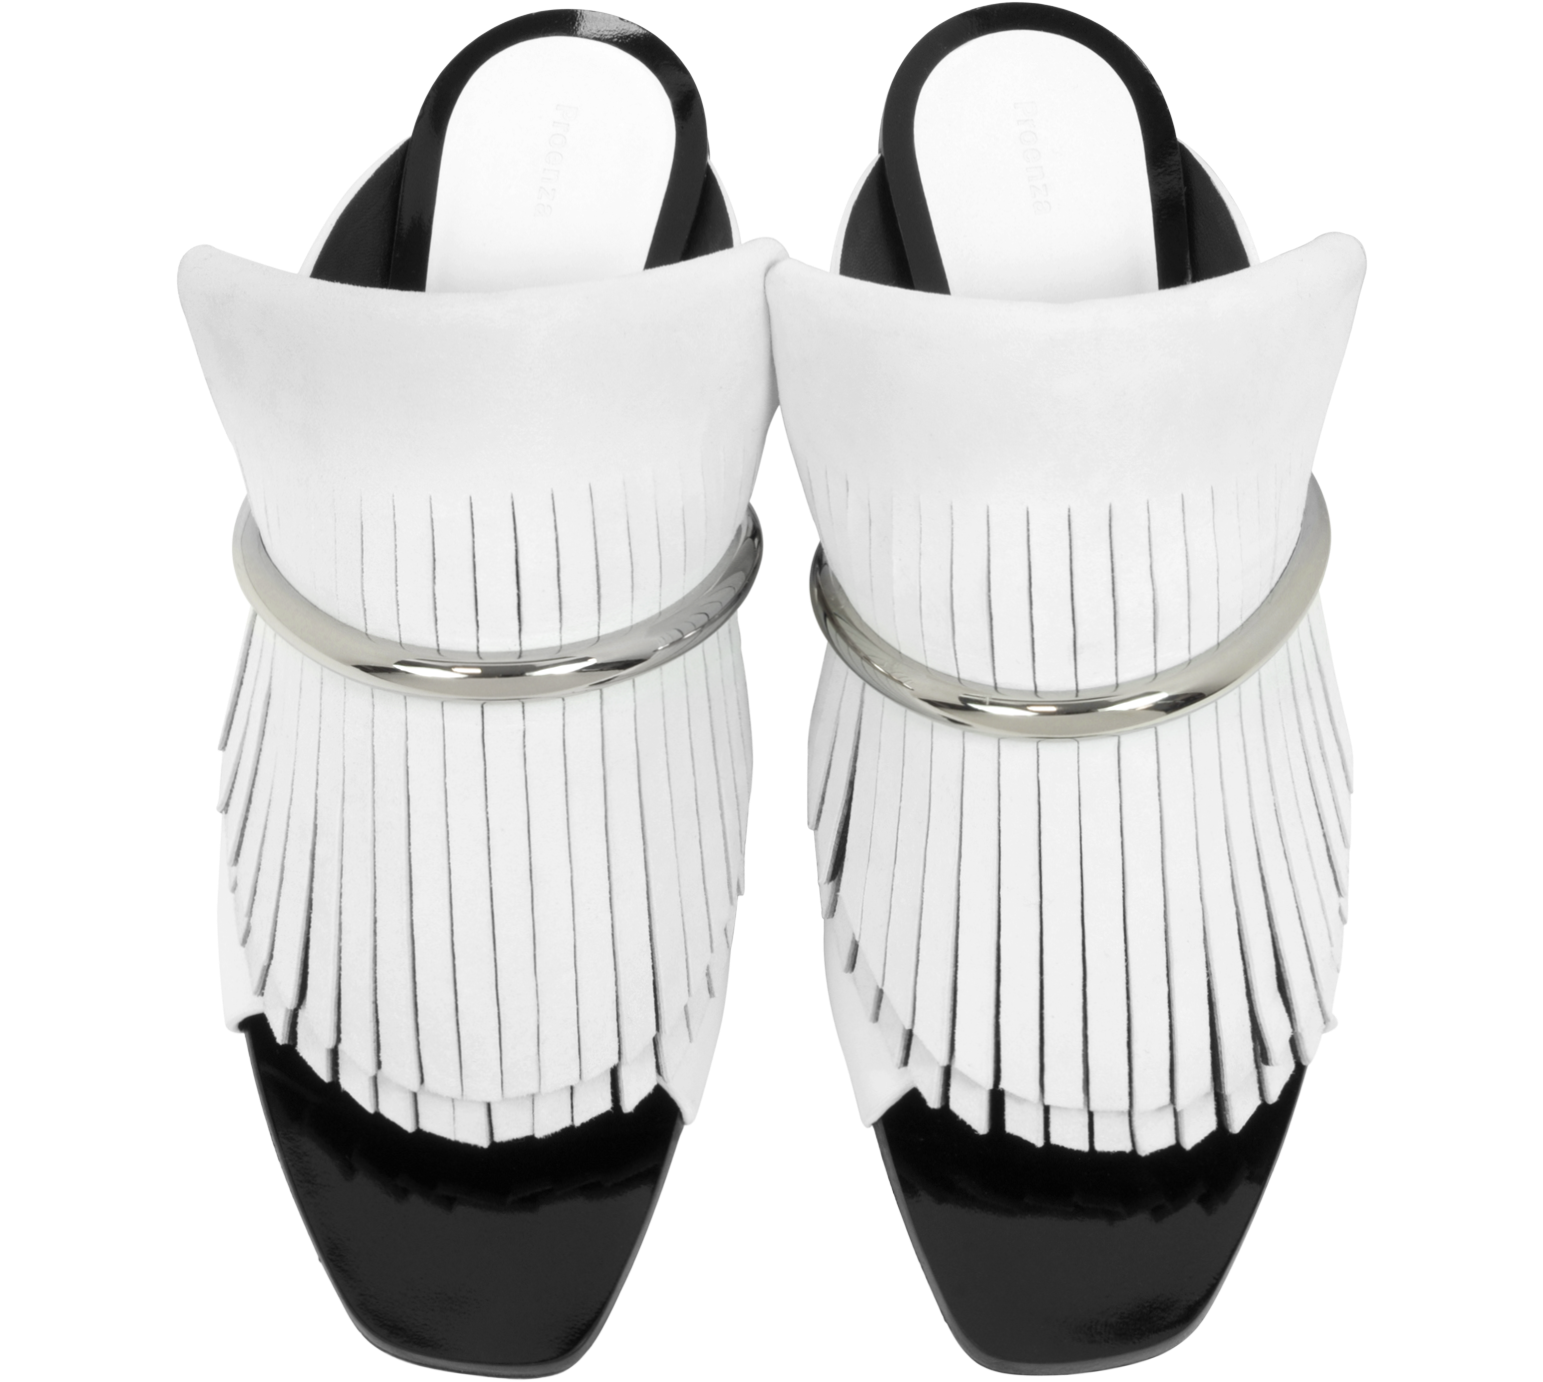 Proenza Schouler White Leather and Suede Fringe Sandal 36 IT/EU at FORZIERI